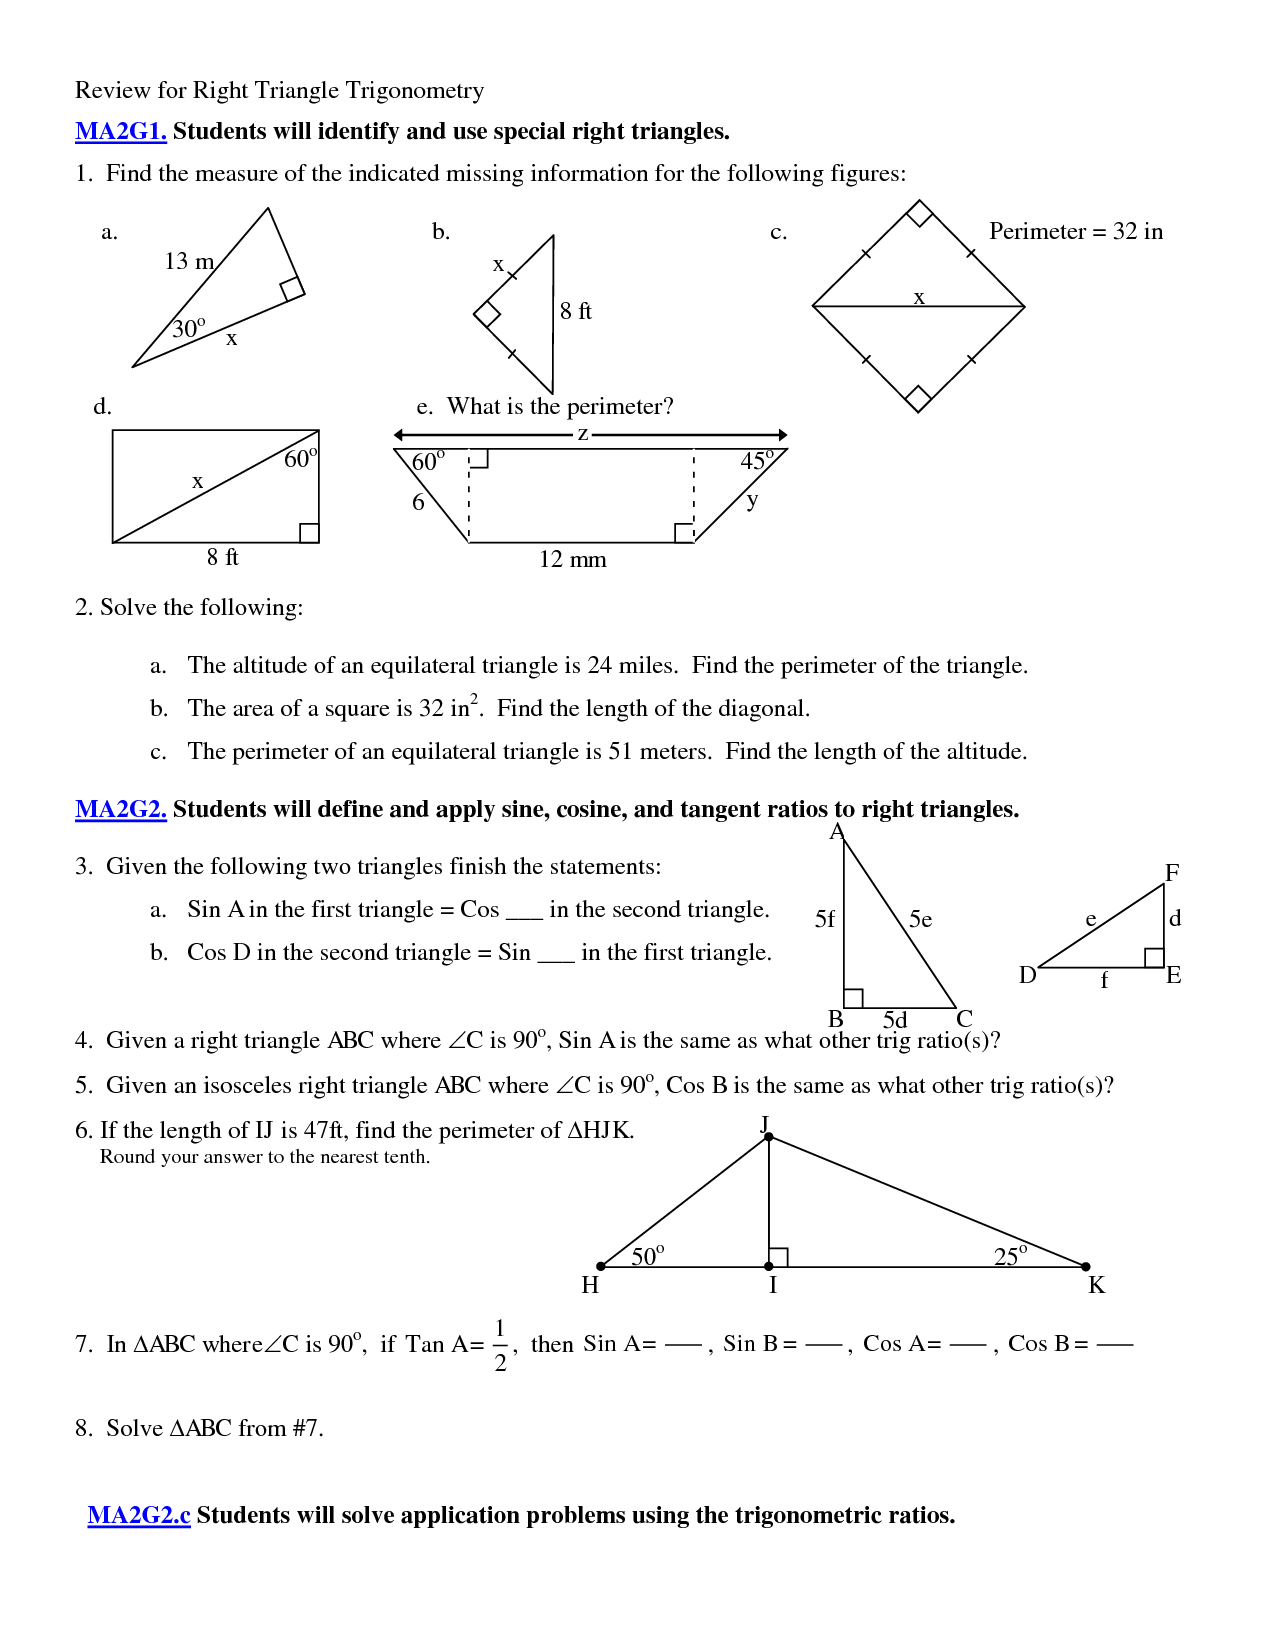 5 Best Images of Applications Of Trigonometry Worksheet  Graph Trig Functions Worksheet, Right 